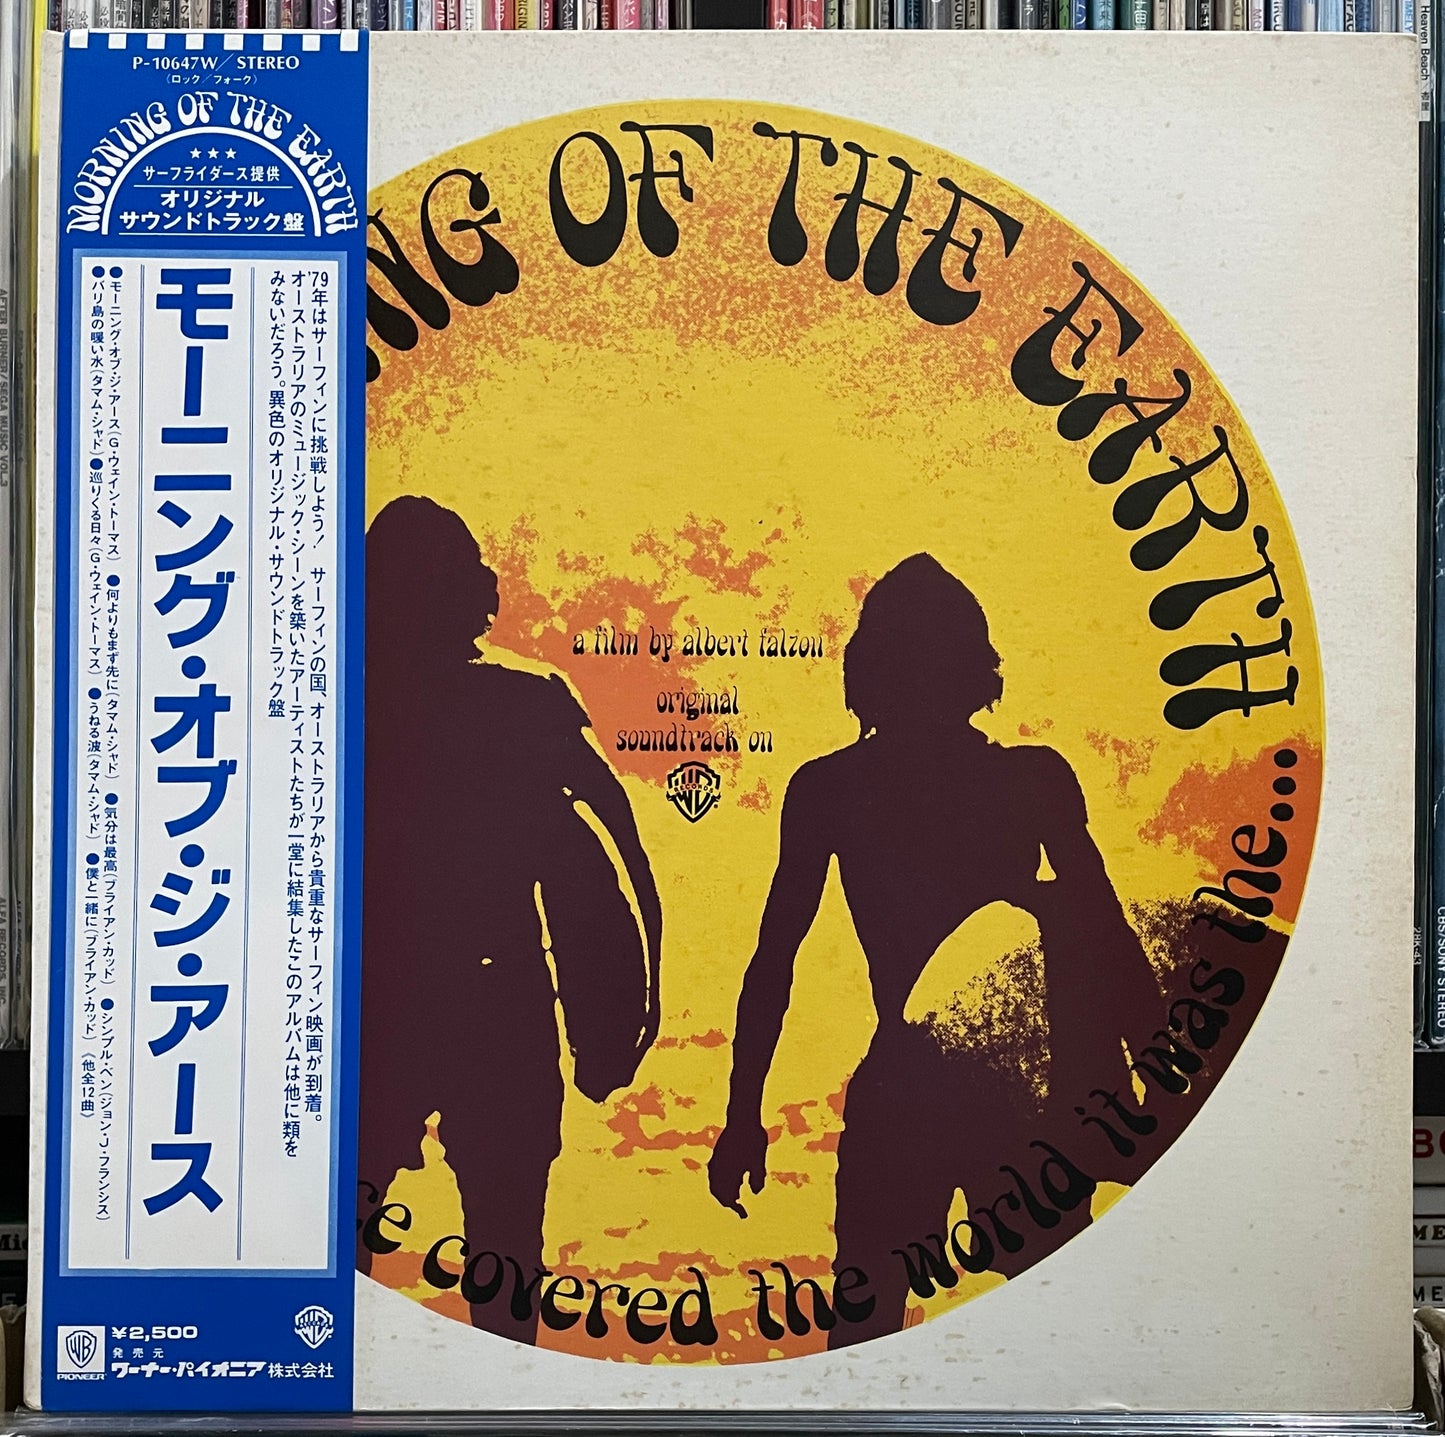 Morning Of The Earth OST (1979)